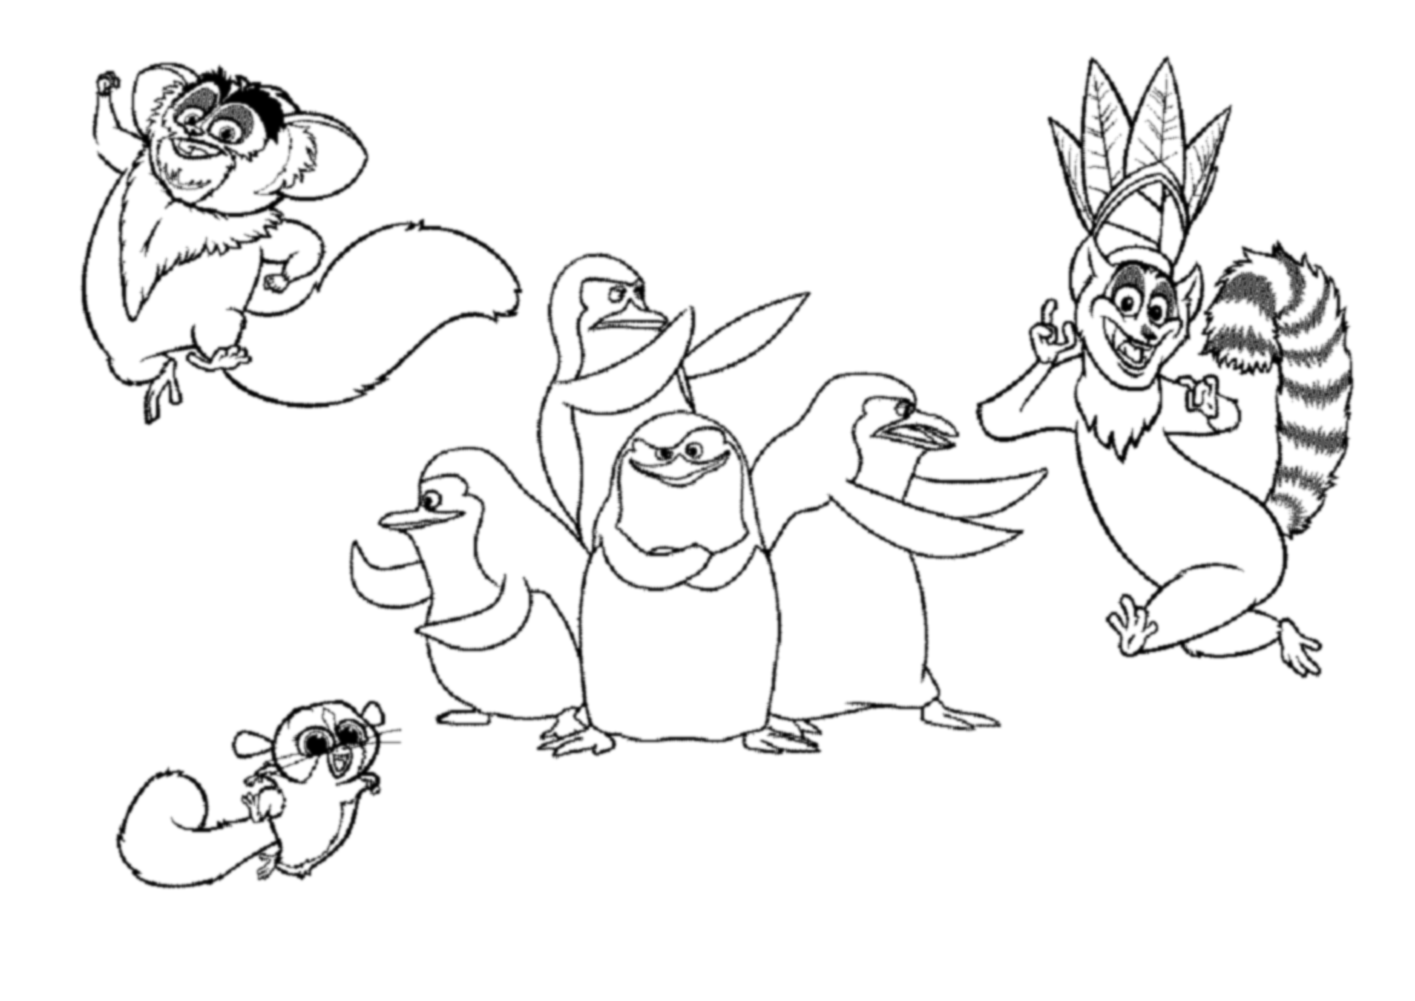 Penguins coloring page